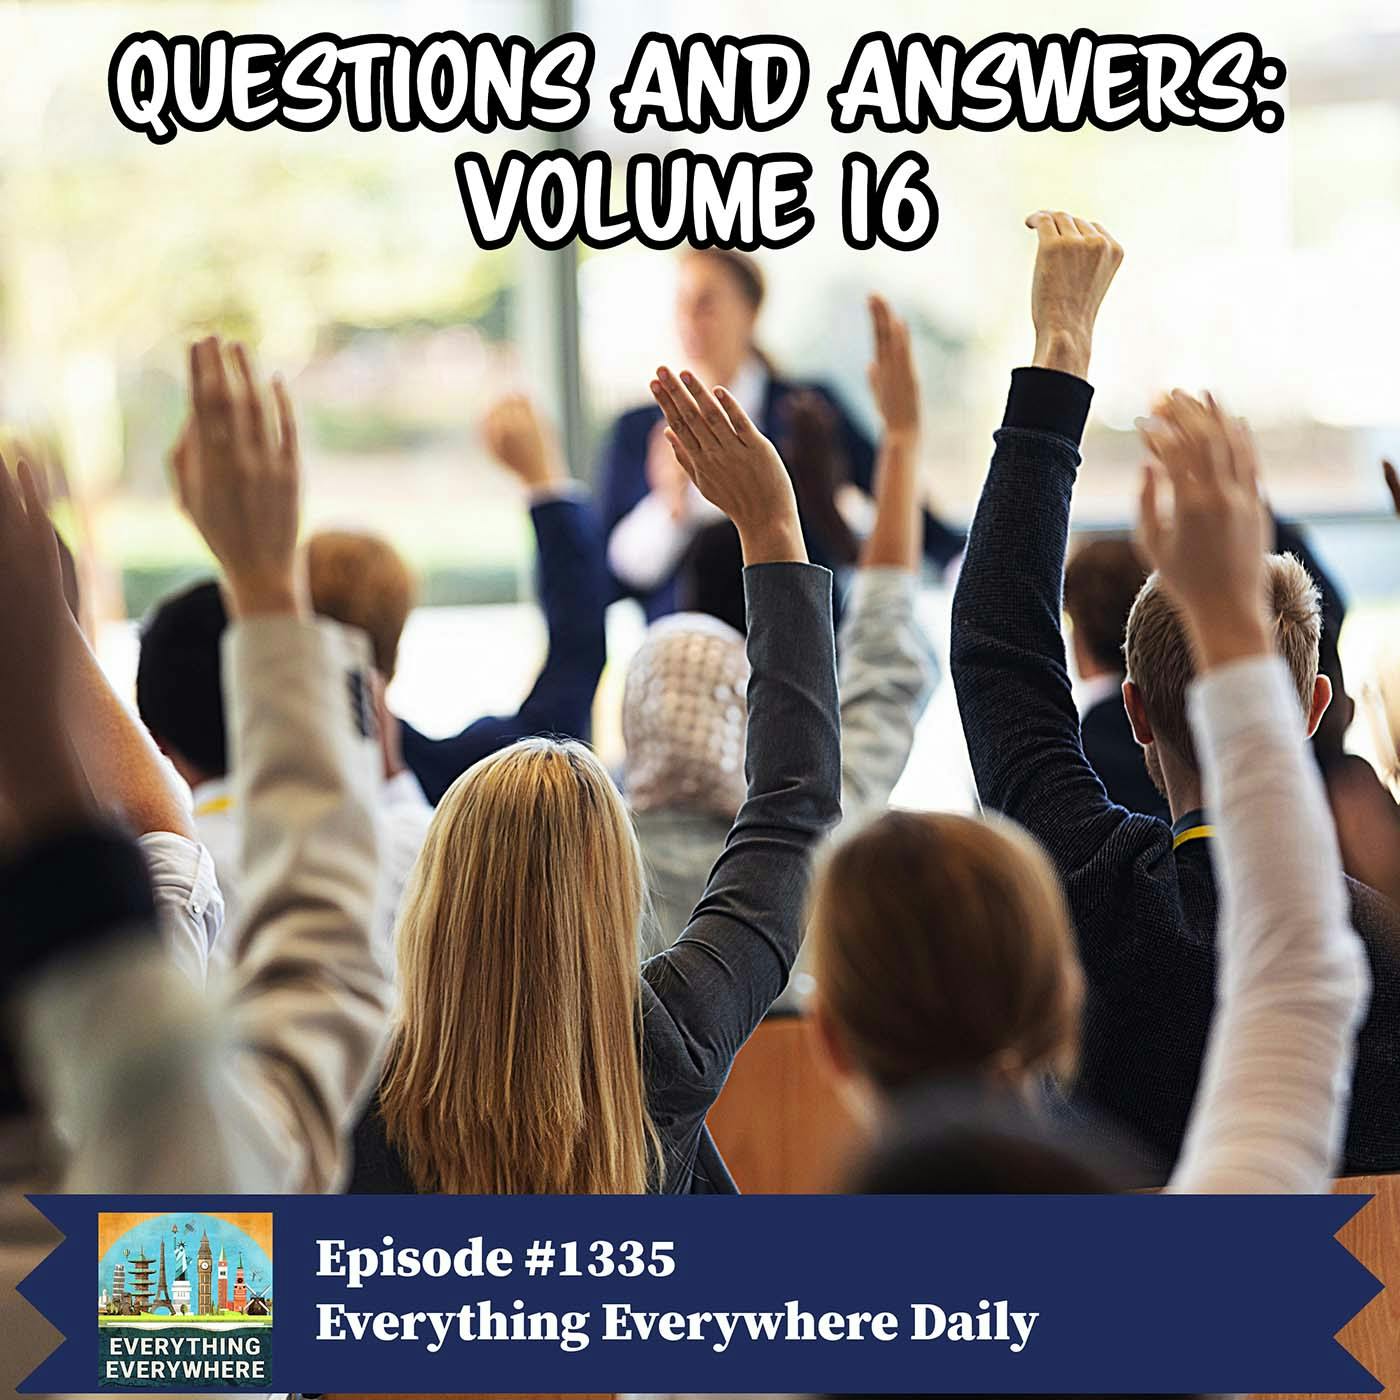 Questions and Answers: Volume 16